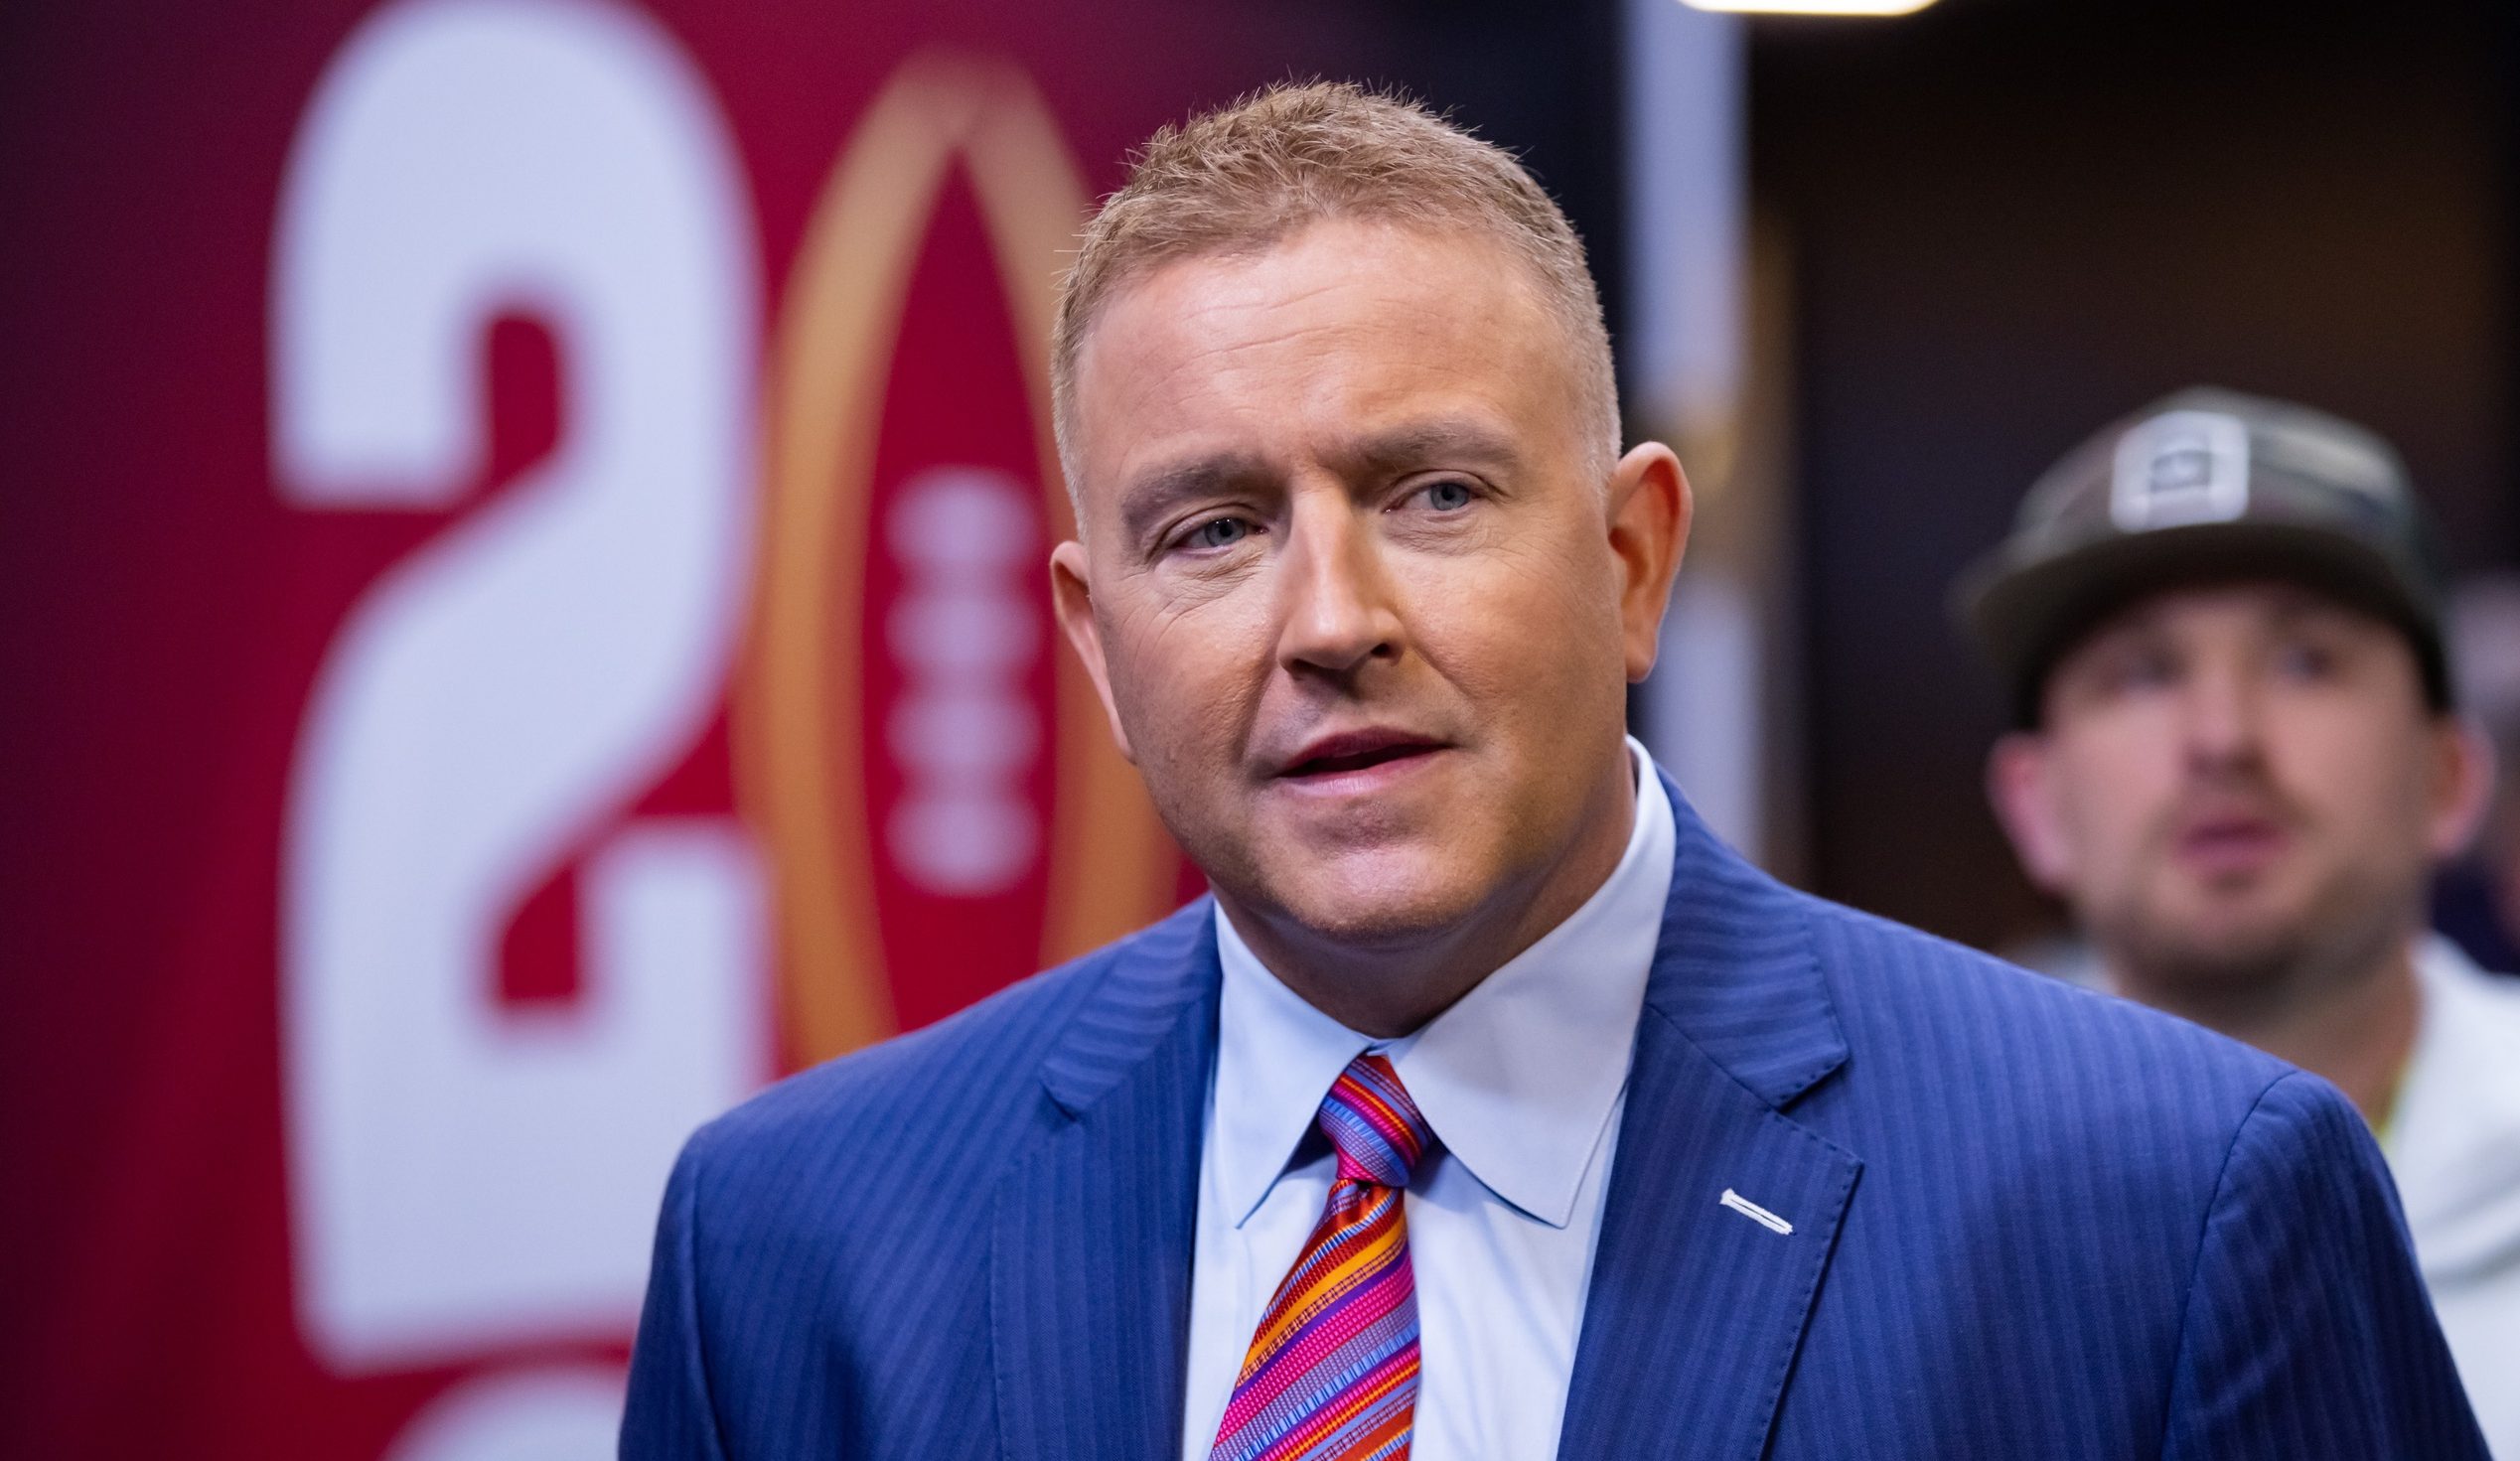 ESPN football analyst Kirk Herbstreit during the TCU Horned Frogs game against the Georgia Bulldogs during the CFP national championship game at SoFi Stadium.